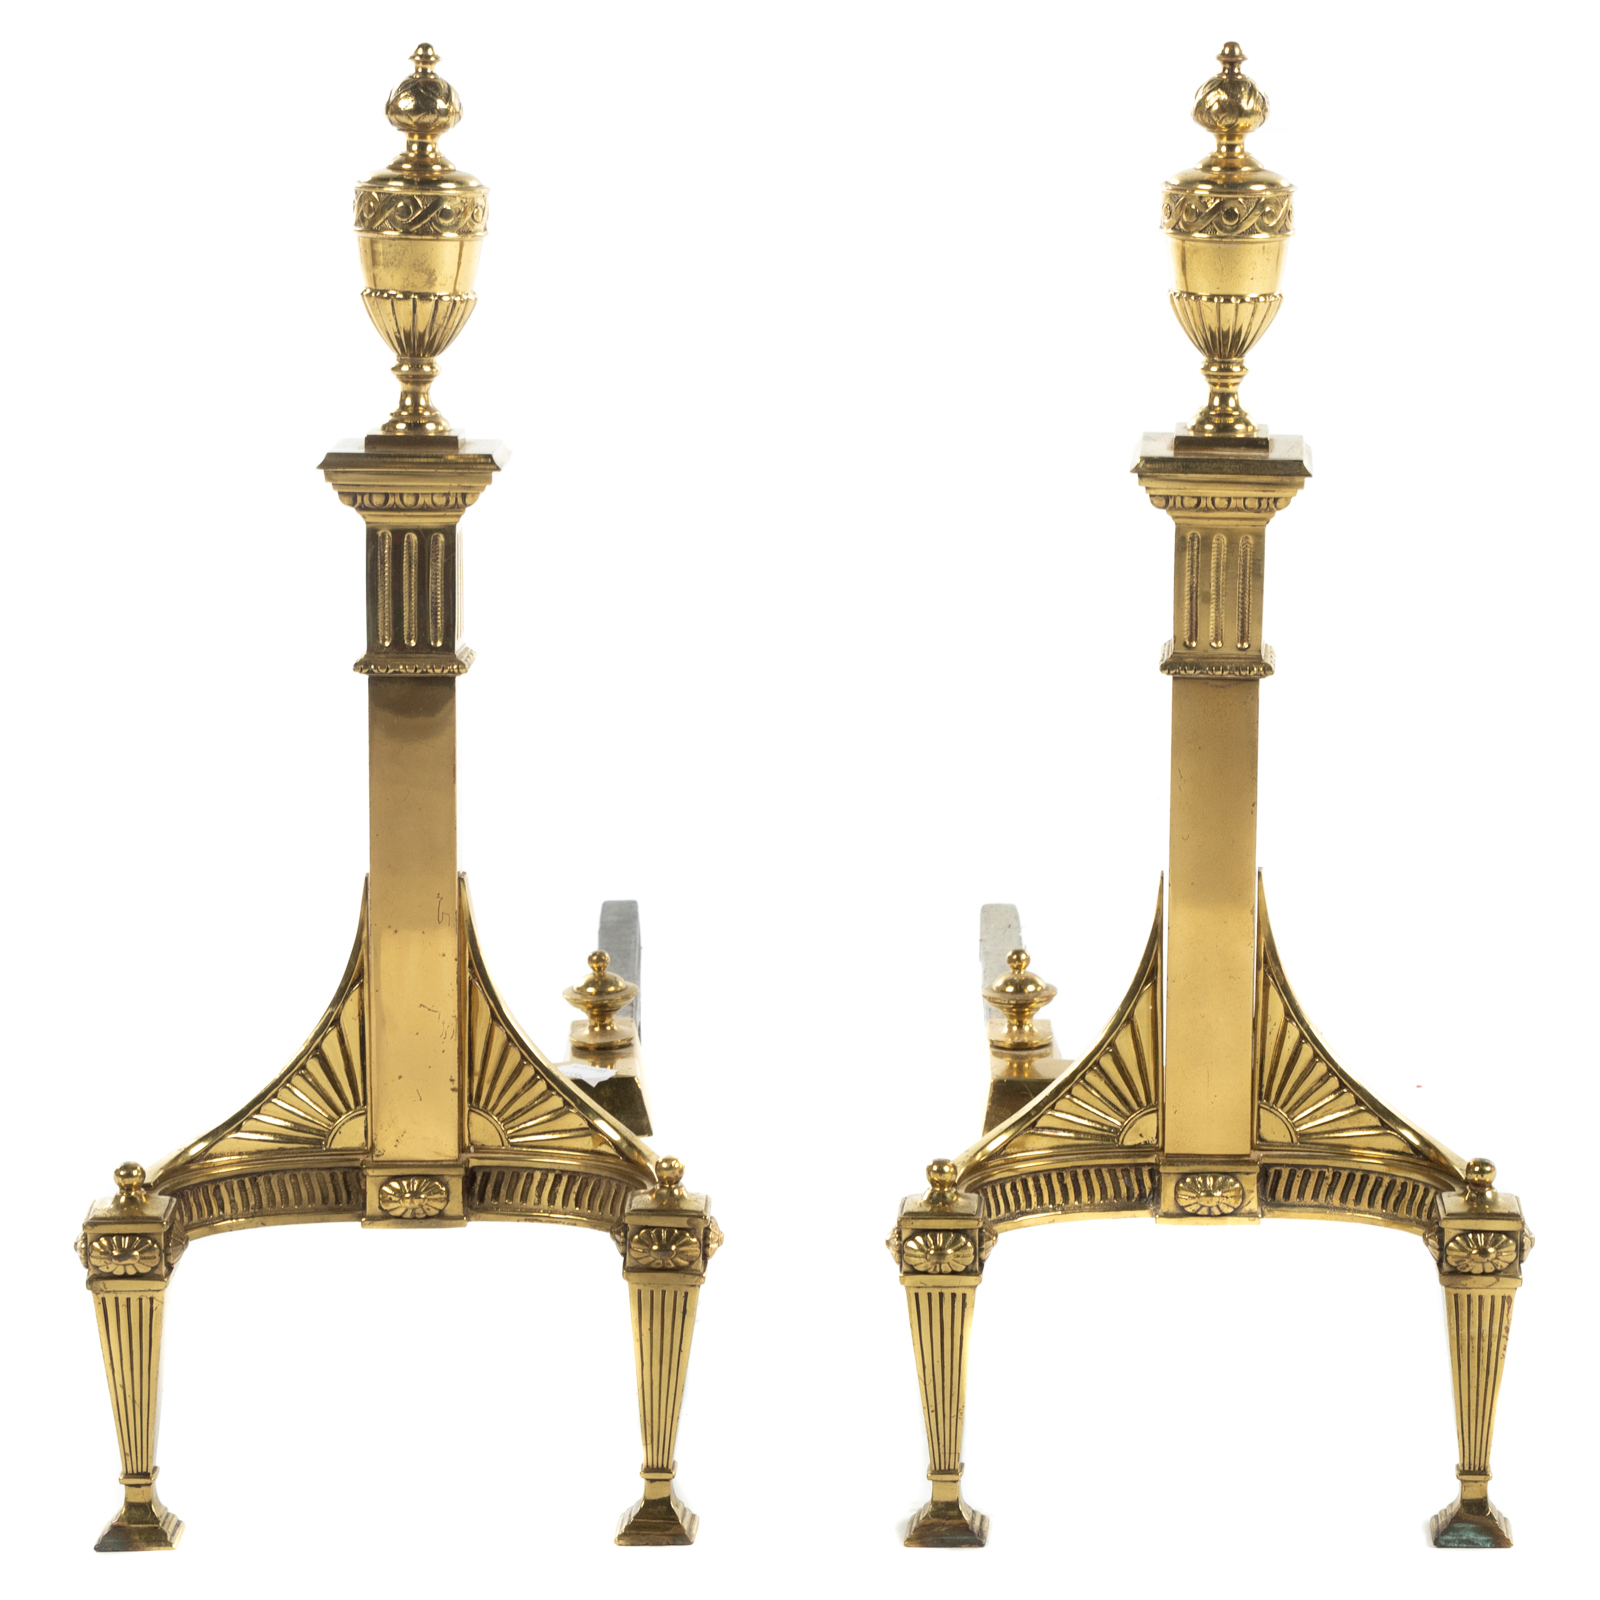 A PAIR OF FEDERAL STYLE BRASS URN